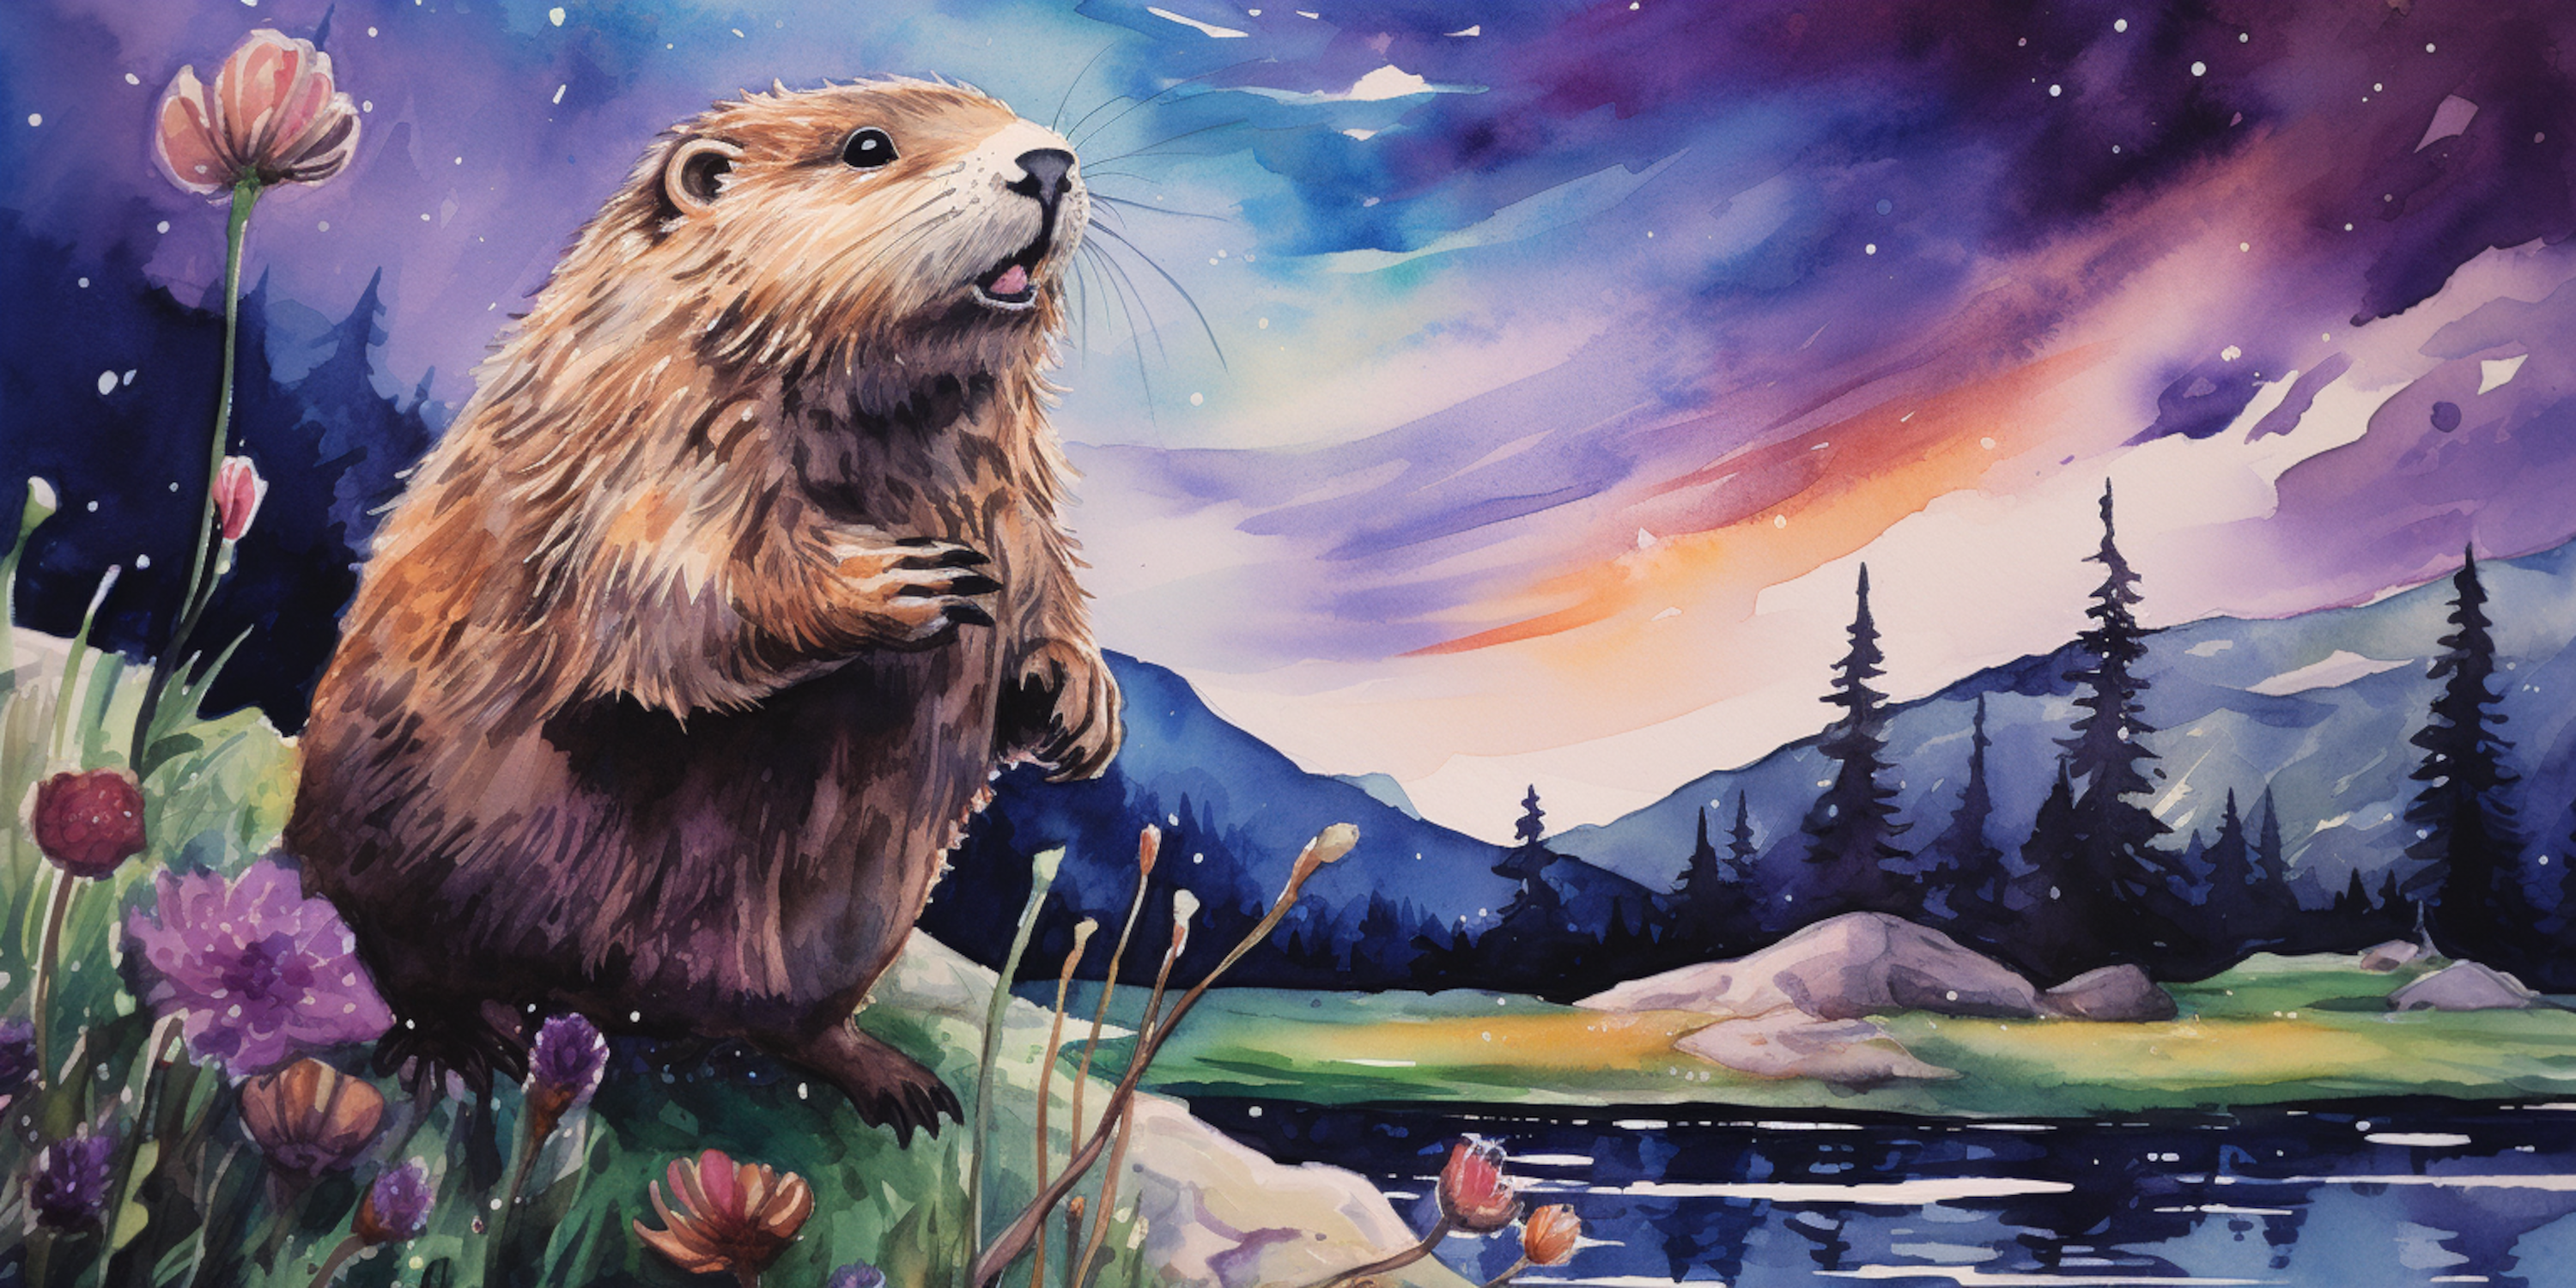 Gopher standing out by the lake at night looking into a dreamy sky, inquisitive to the meaning of life.